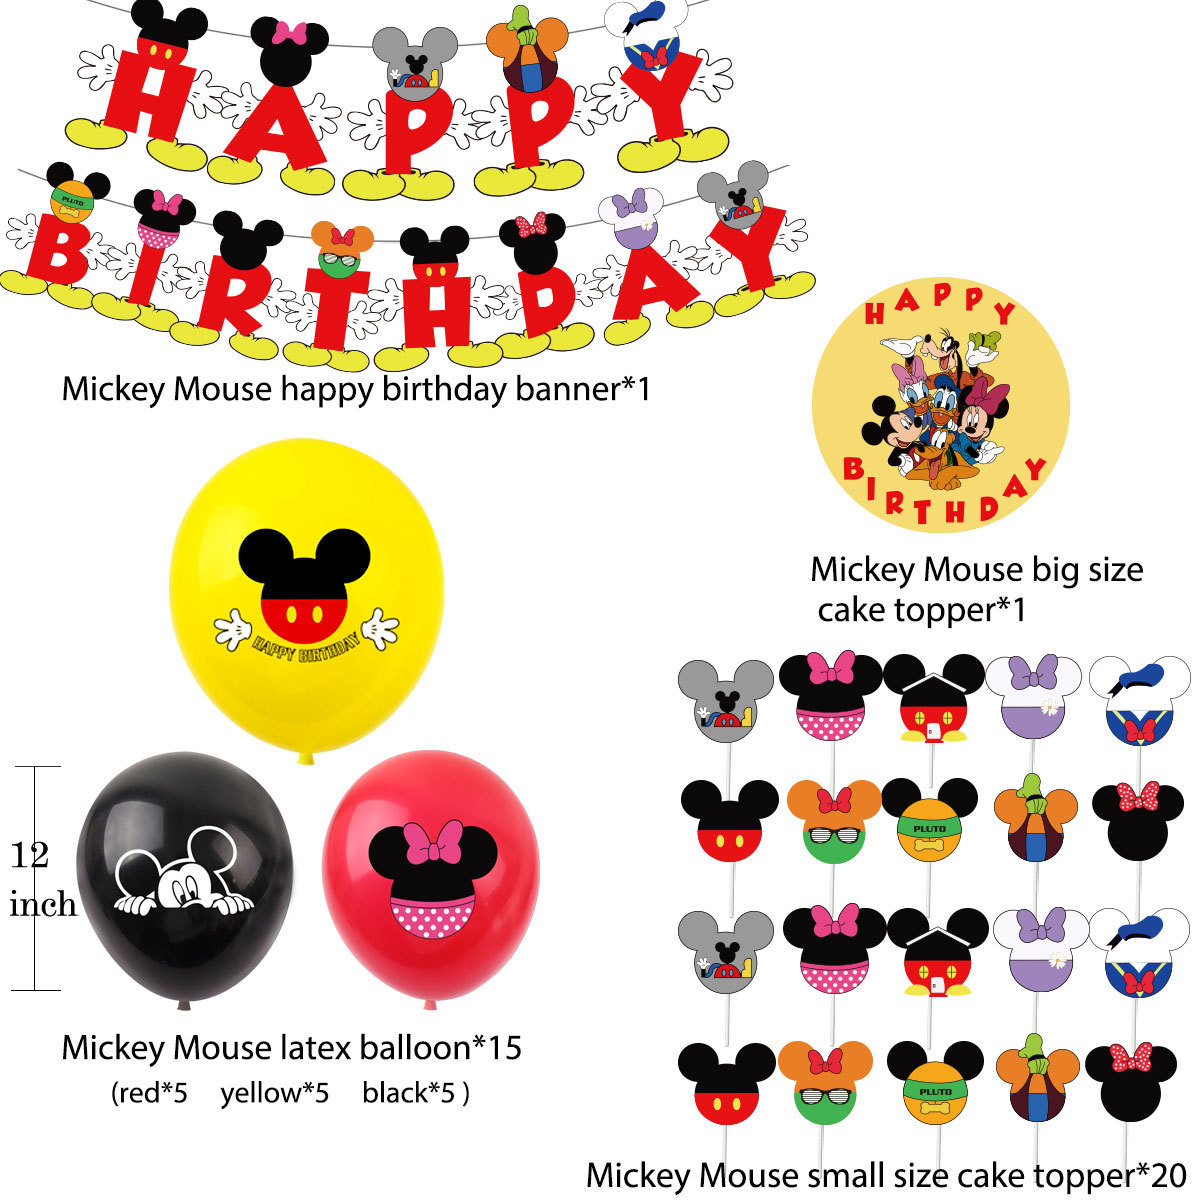 Mickey and Minnie Mouse Birthday Decorations.